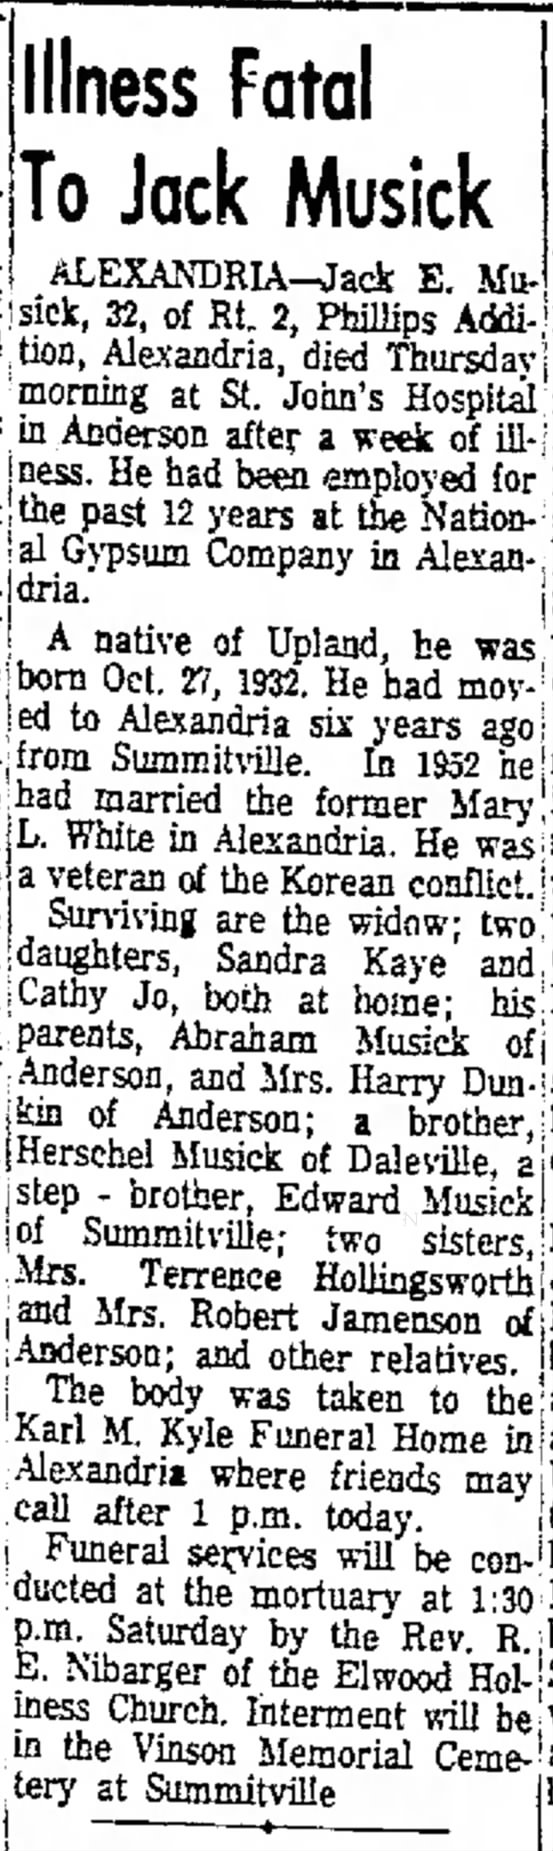 Jack Musick Obituary, Anderson Herald, 12 Mar 1965, page 2